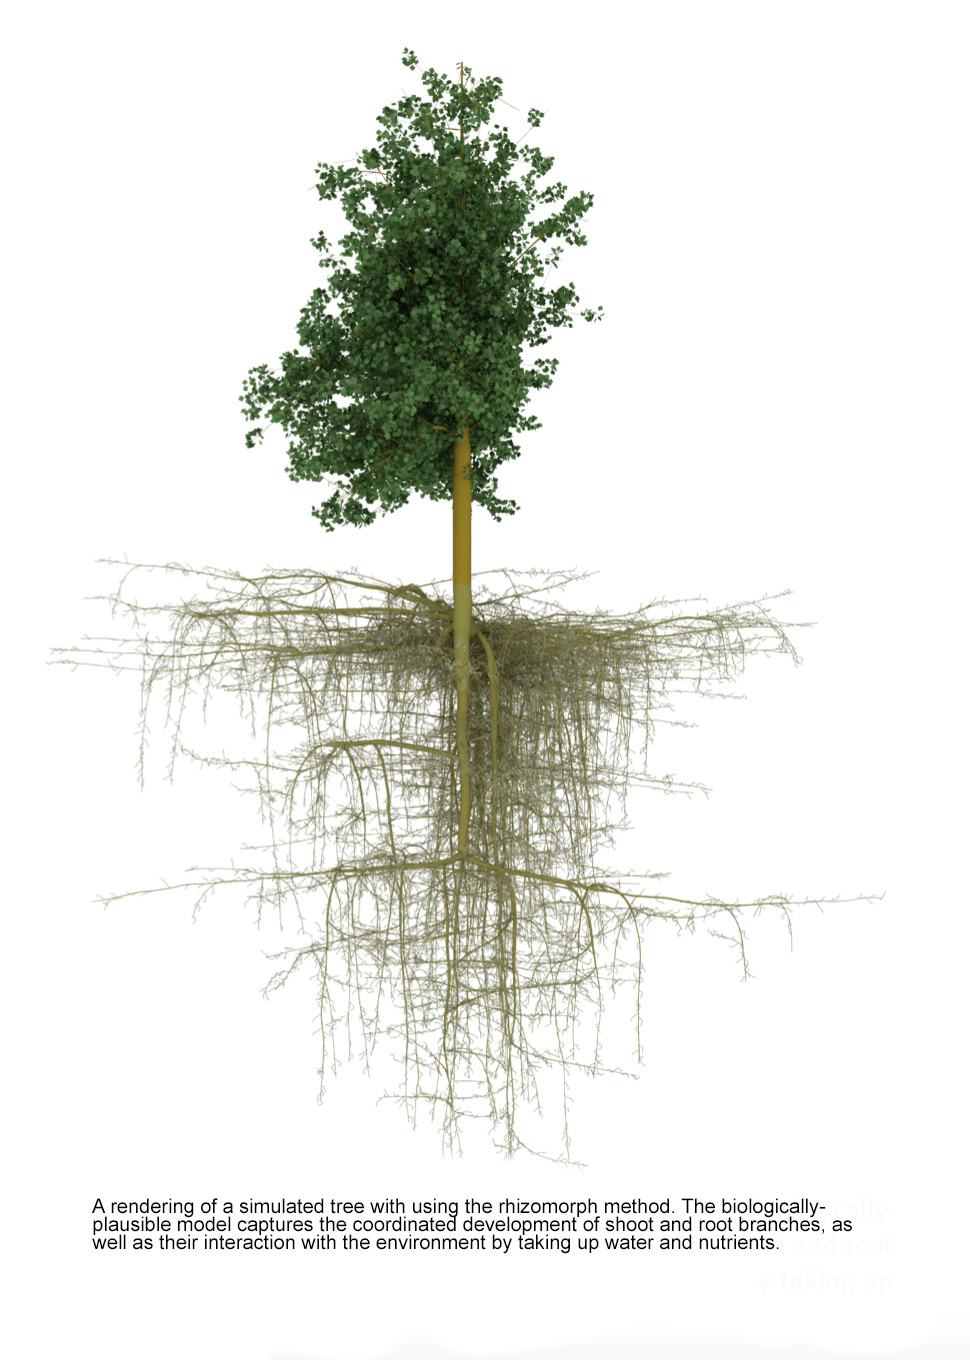 A rendering of a simulated tree with using the rhizomorph method. The biologically- plausible model captures the coordinated development of shoot and root branches, as well as their interaction with the environment by taking up water and nutrients.